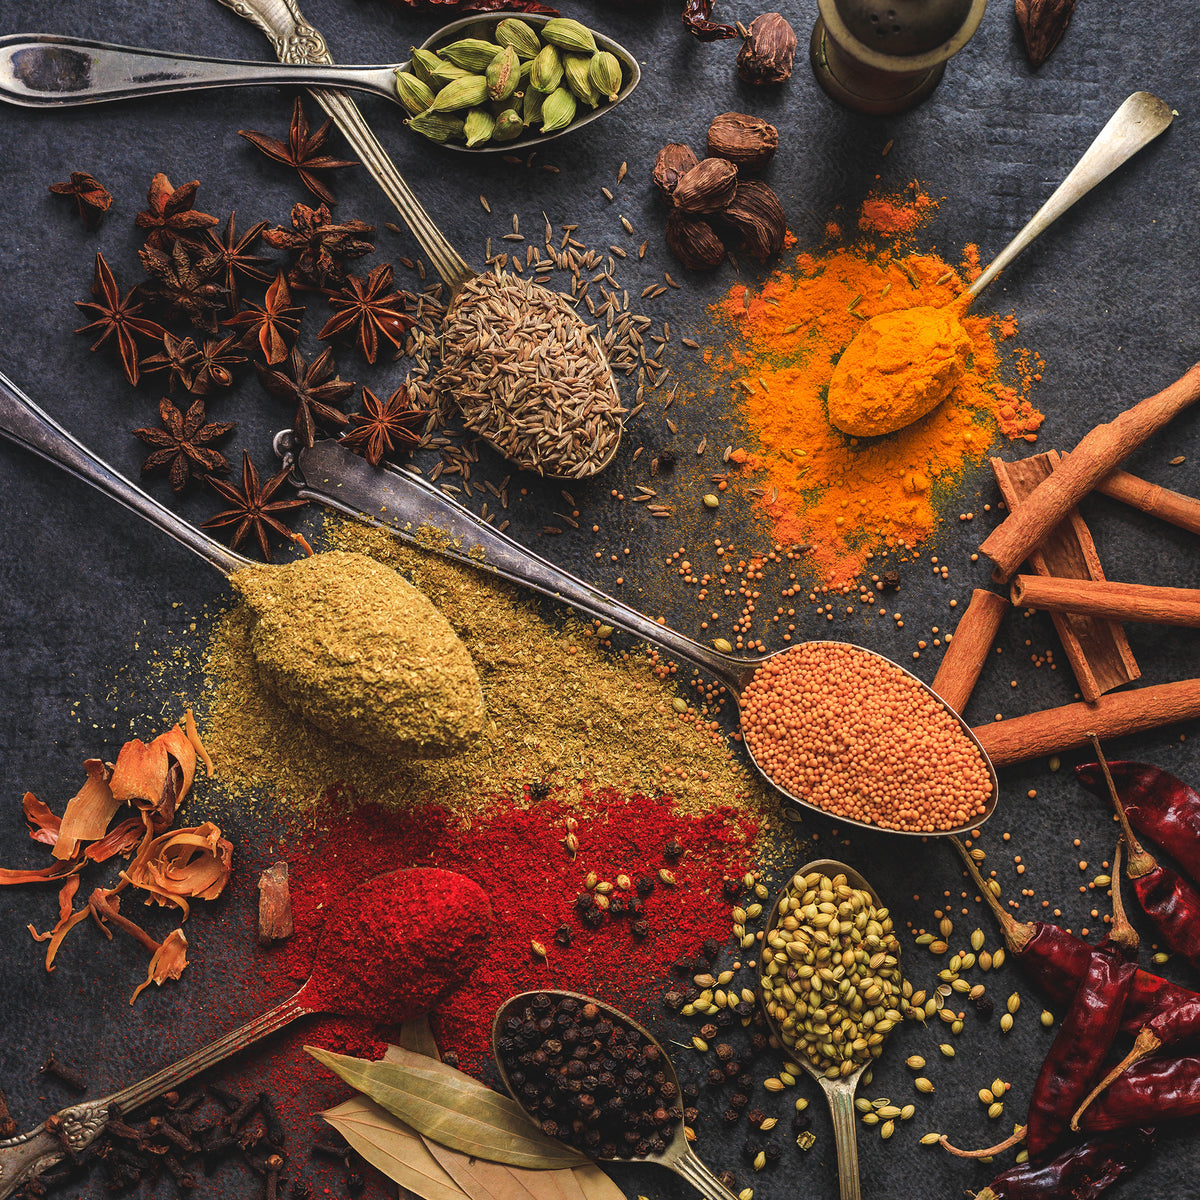 4 spice mix recipes from around the world that are easy to make